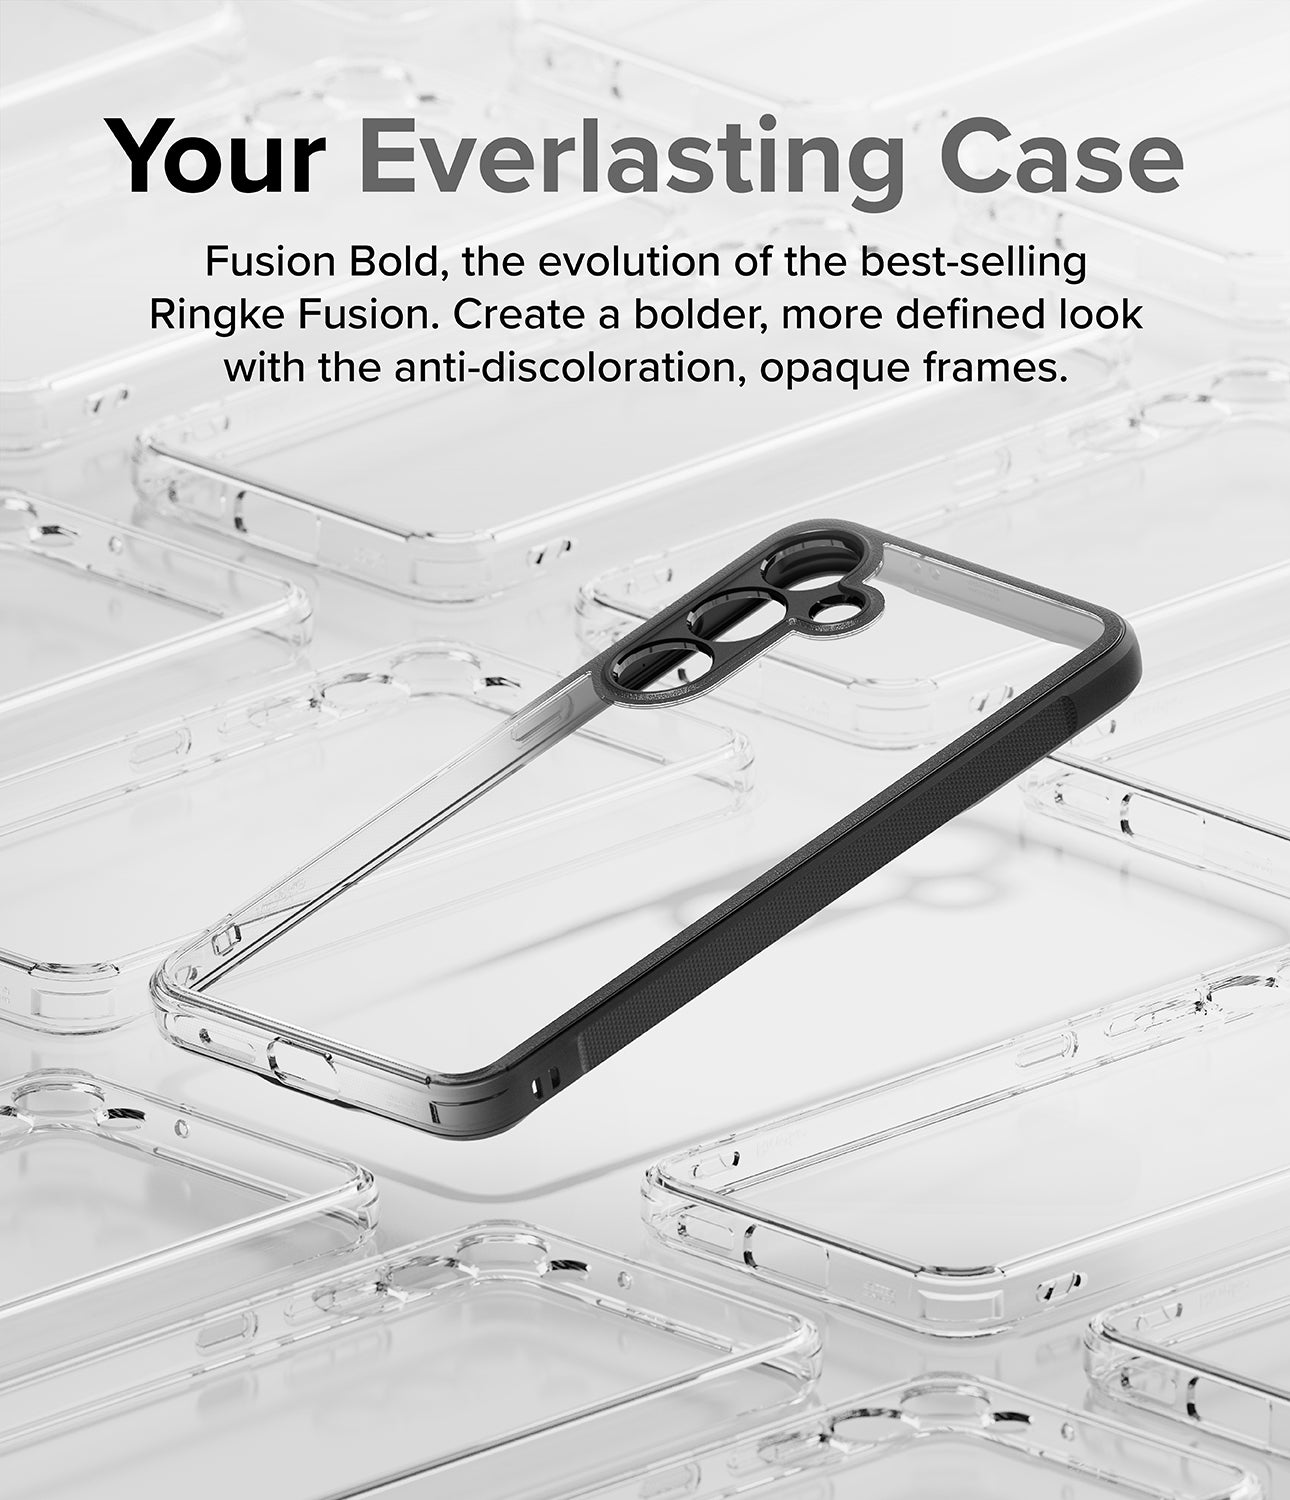 Galaxy S24 Plus Case | Fusion Bold - Your Everlasting Case. Fusion Bold, the evolution of the best-selling Ringke Fusion. Create a bolder, more defined look with the anti-discoloration, opaque frames.